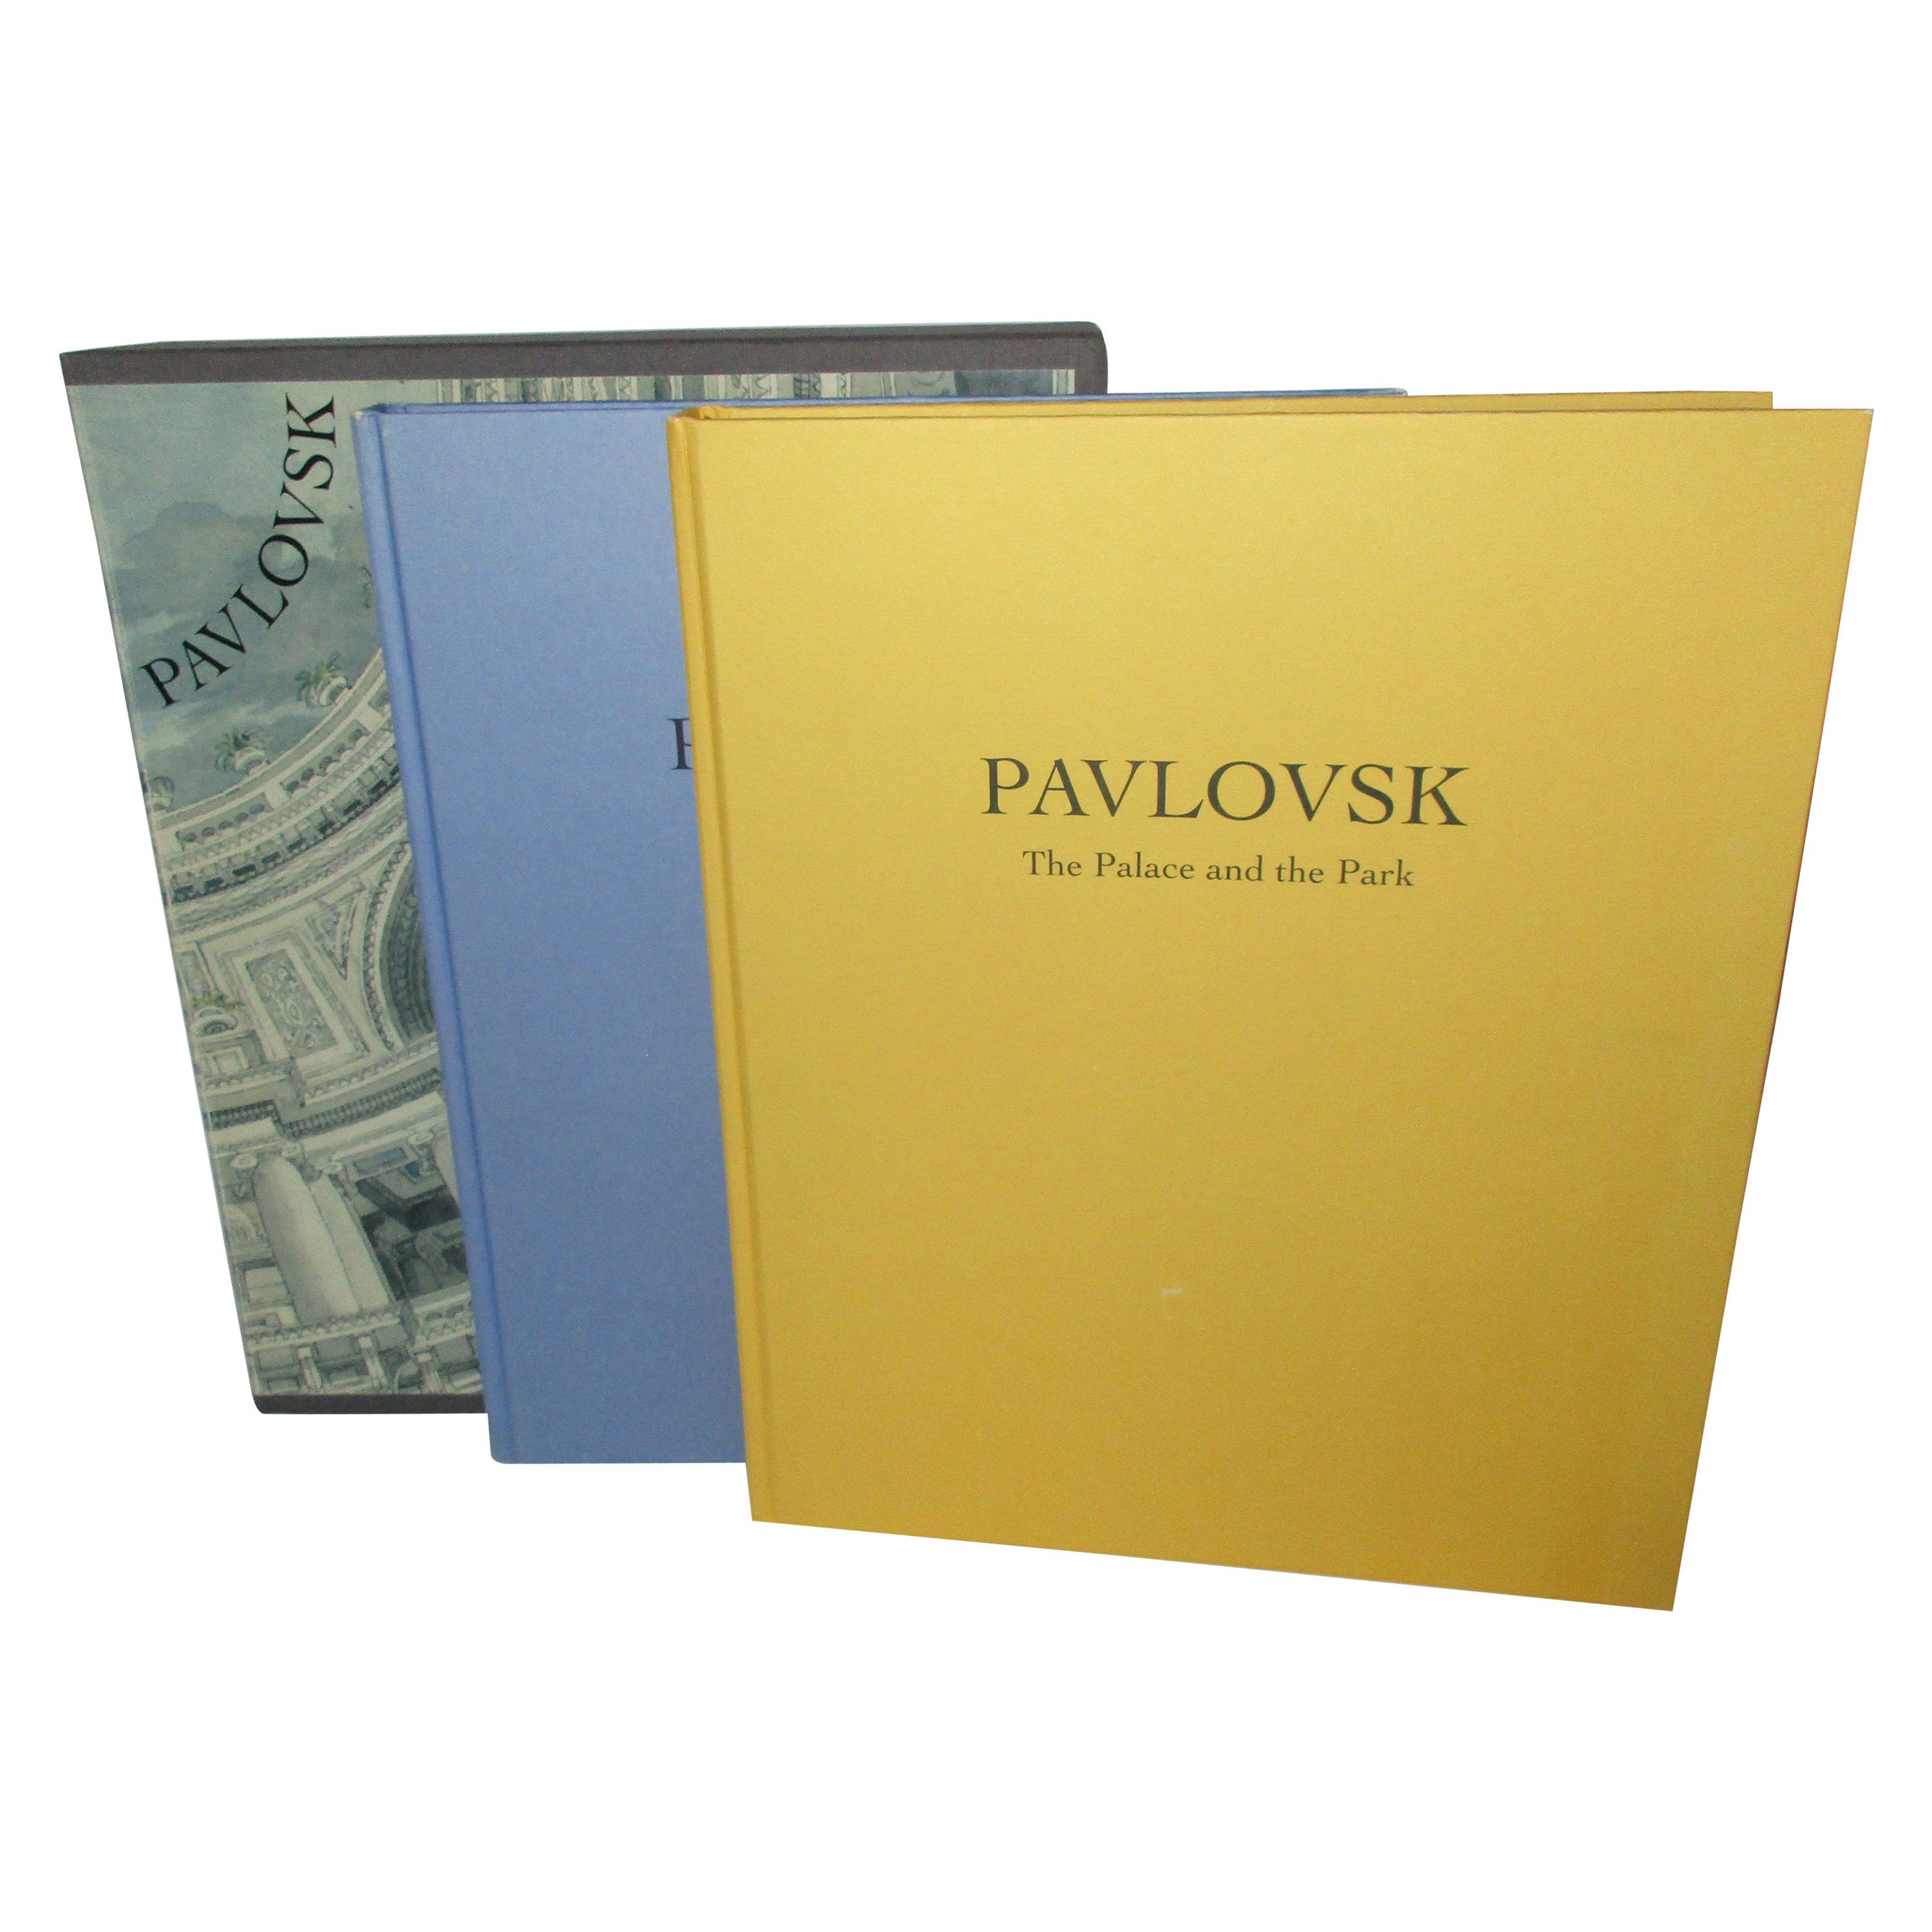 Pavlovsk: The Palace and the Park and the Collections (Book) For Sale